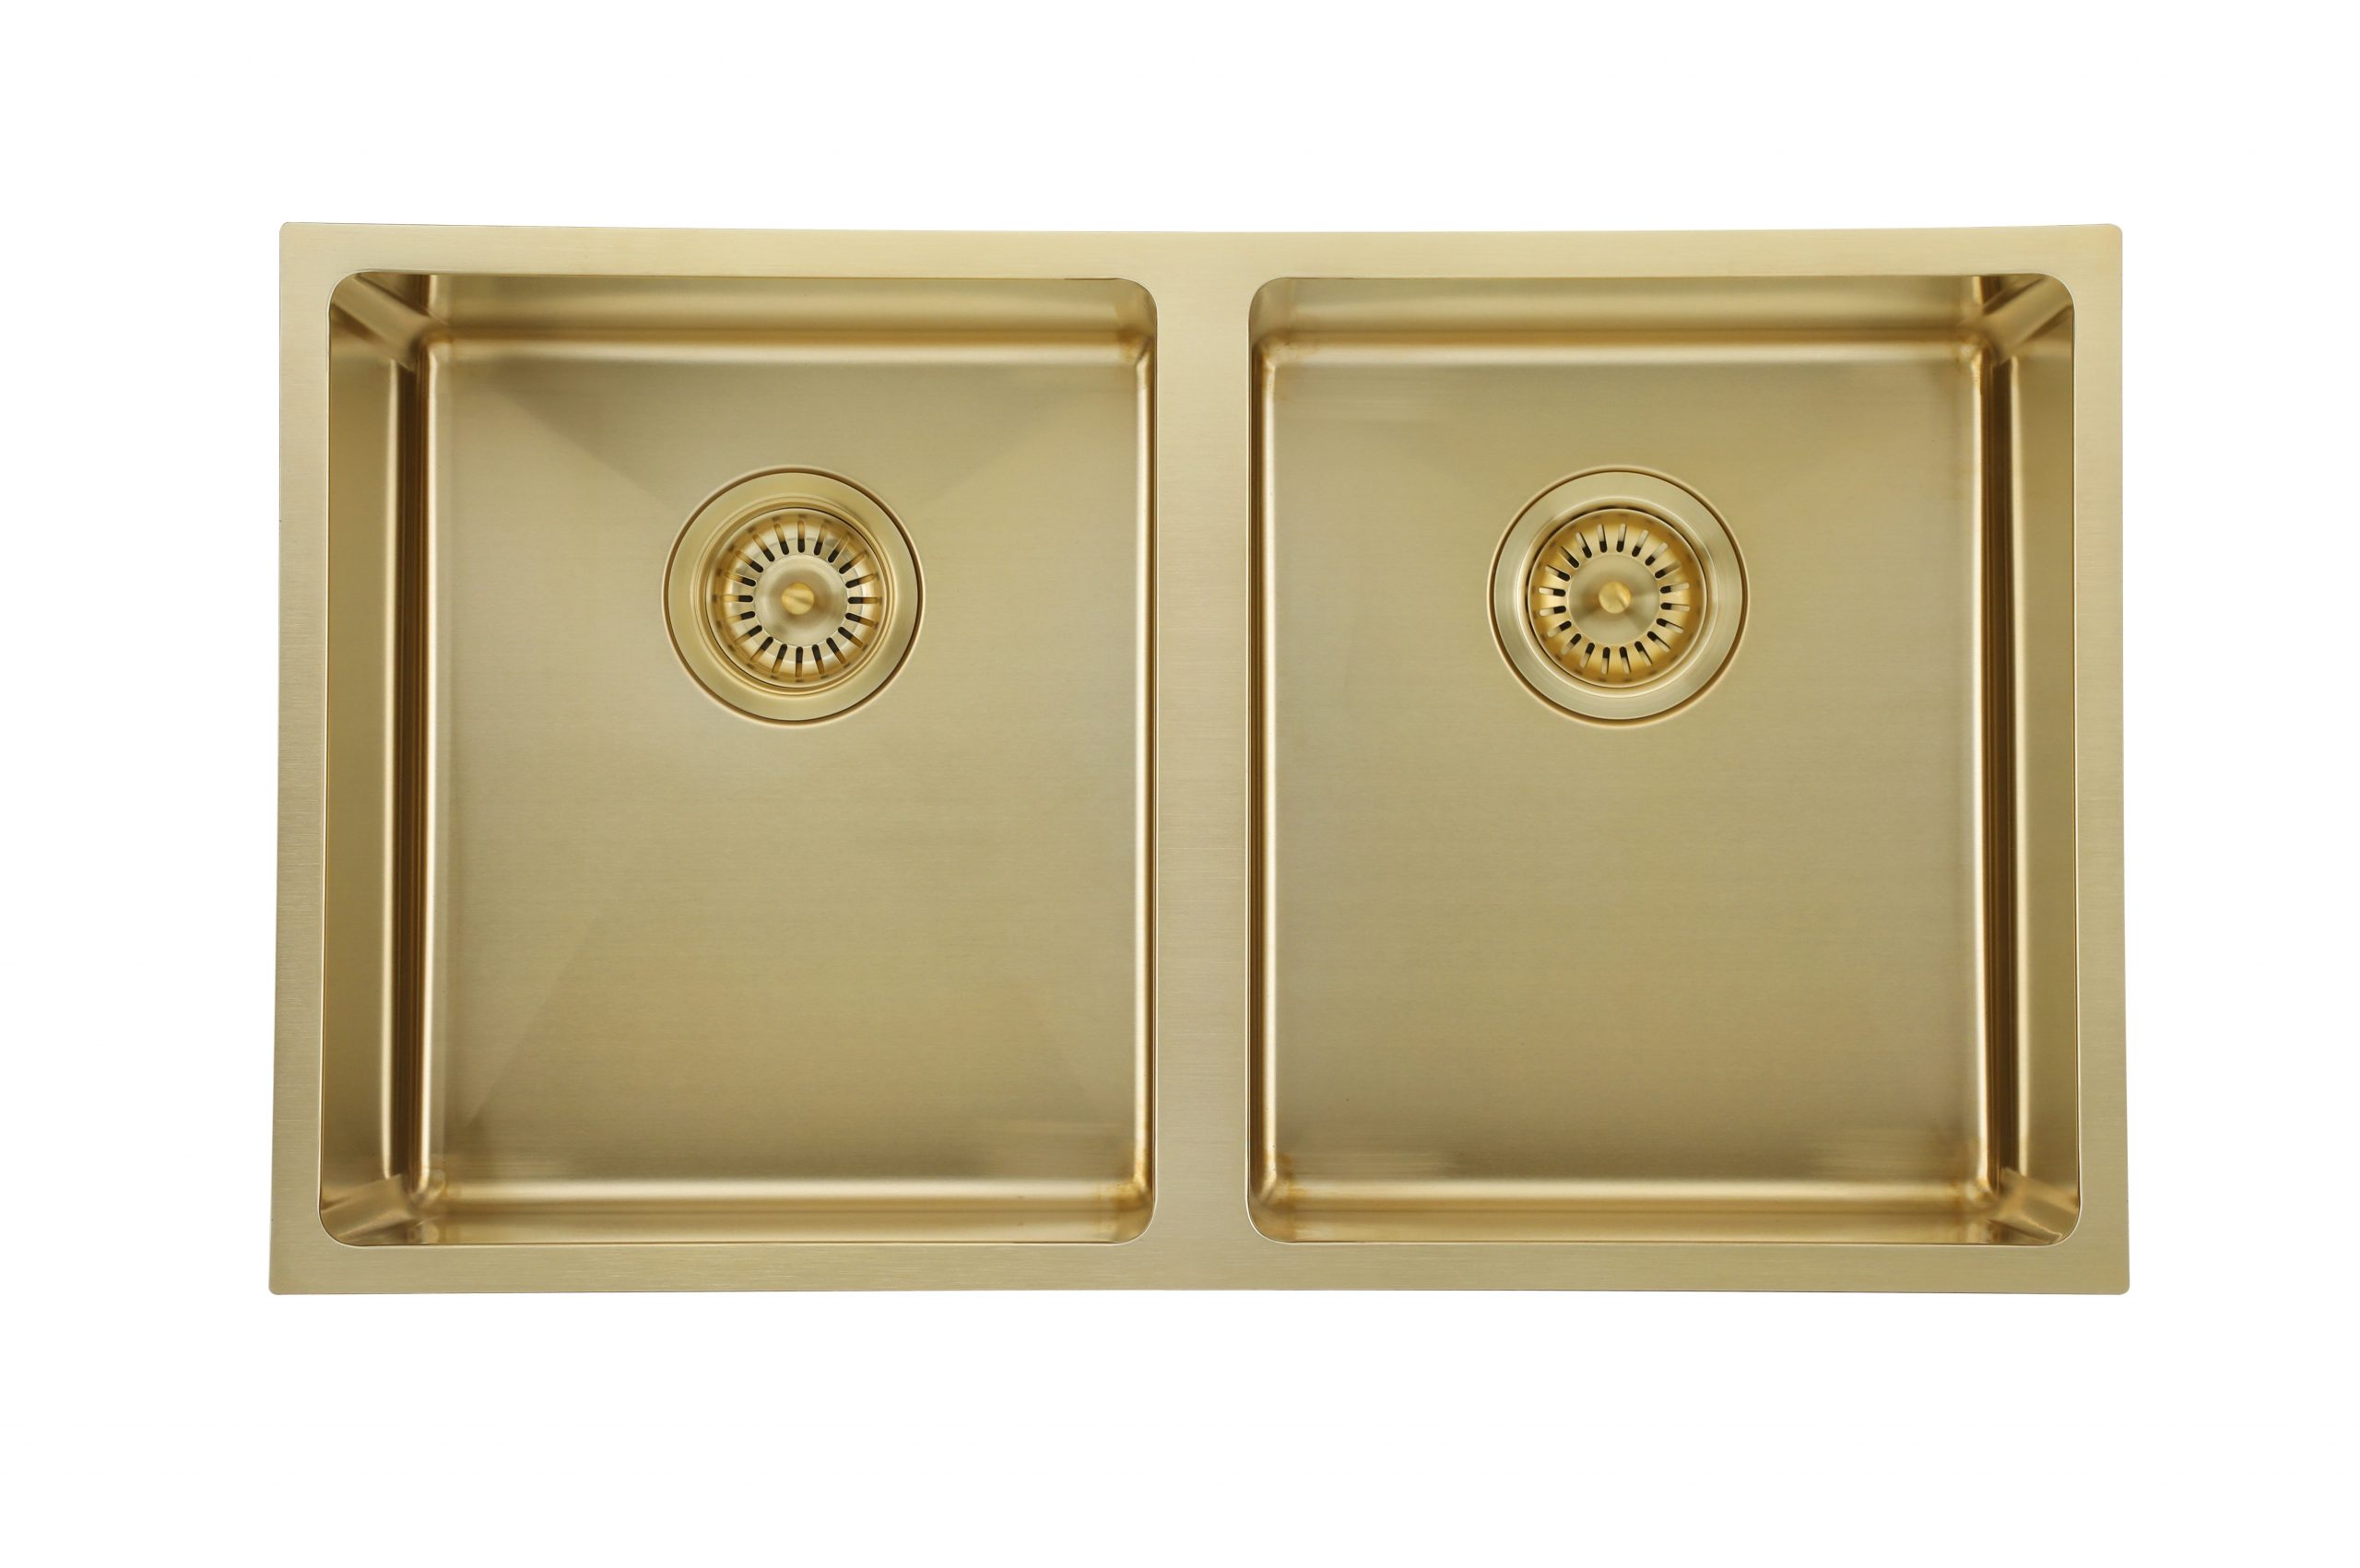 760 x 440 x 200 mm PVD Double Bowl Gold Hand made Kitchen Sink 1.2mm Stainless